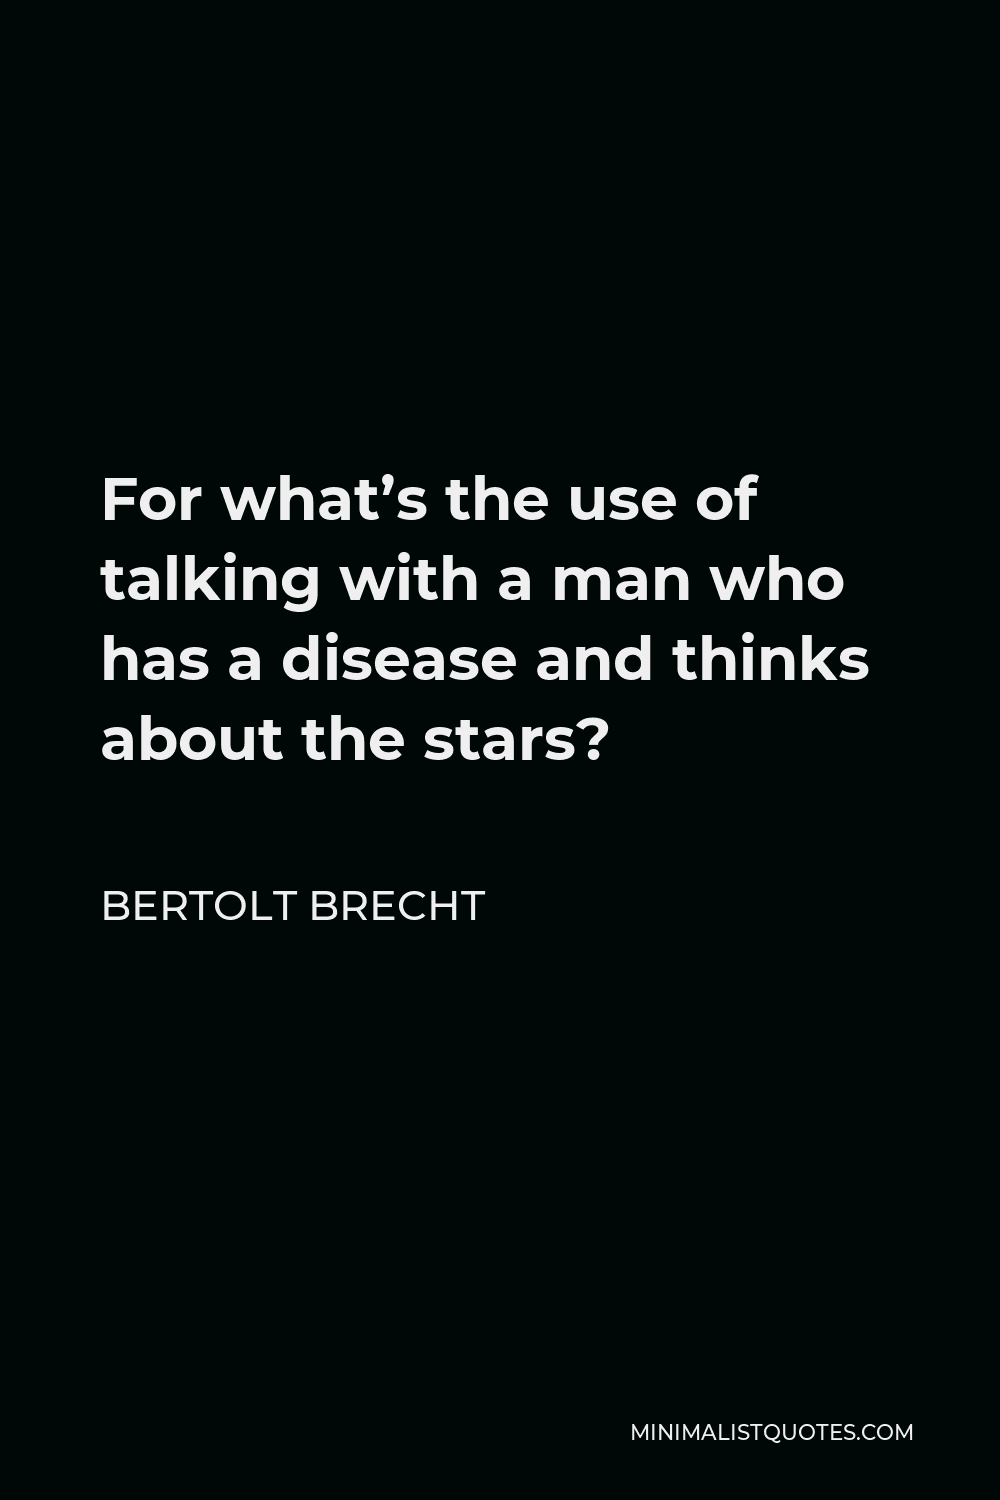 Bertolt Brecht Quote - For what’s the use of talking with a man who has a disease and thinks about the stars?